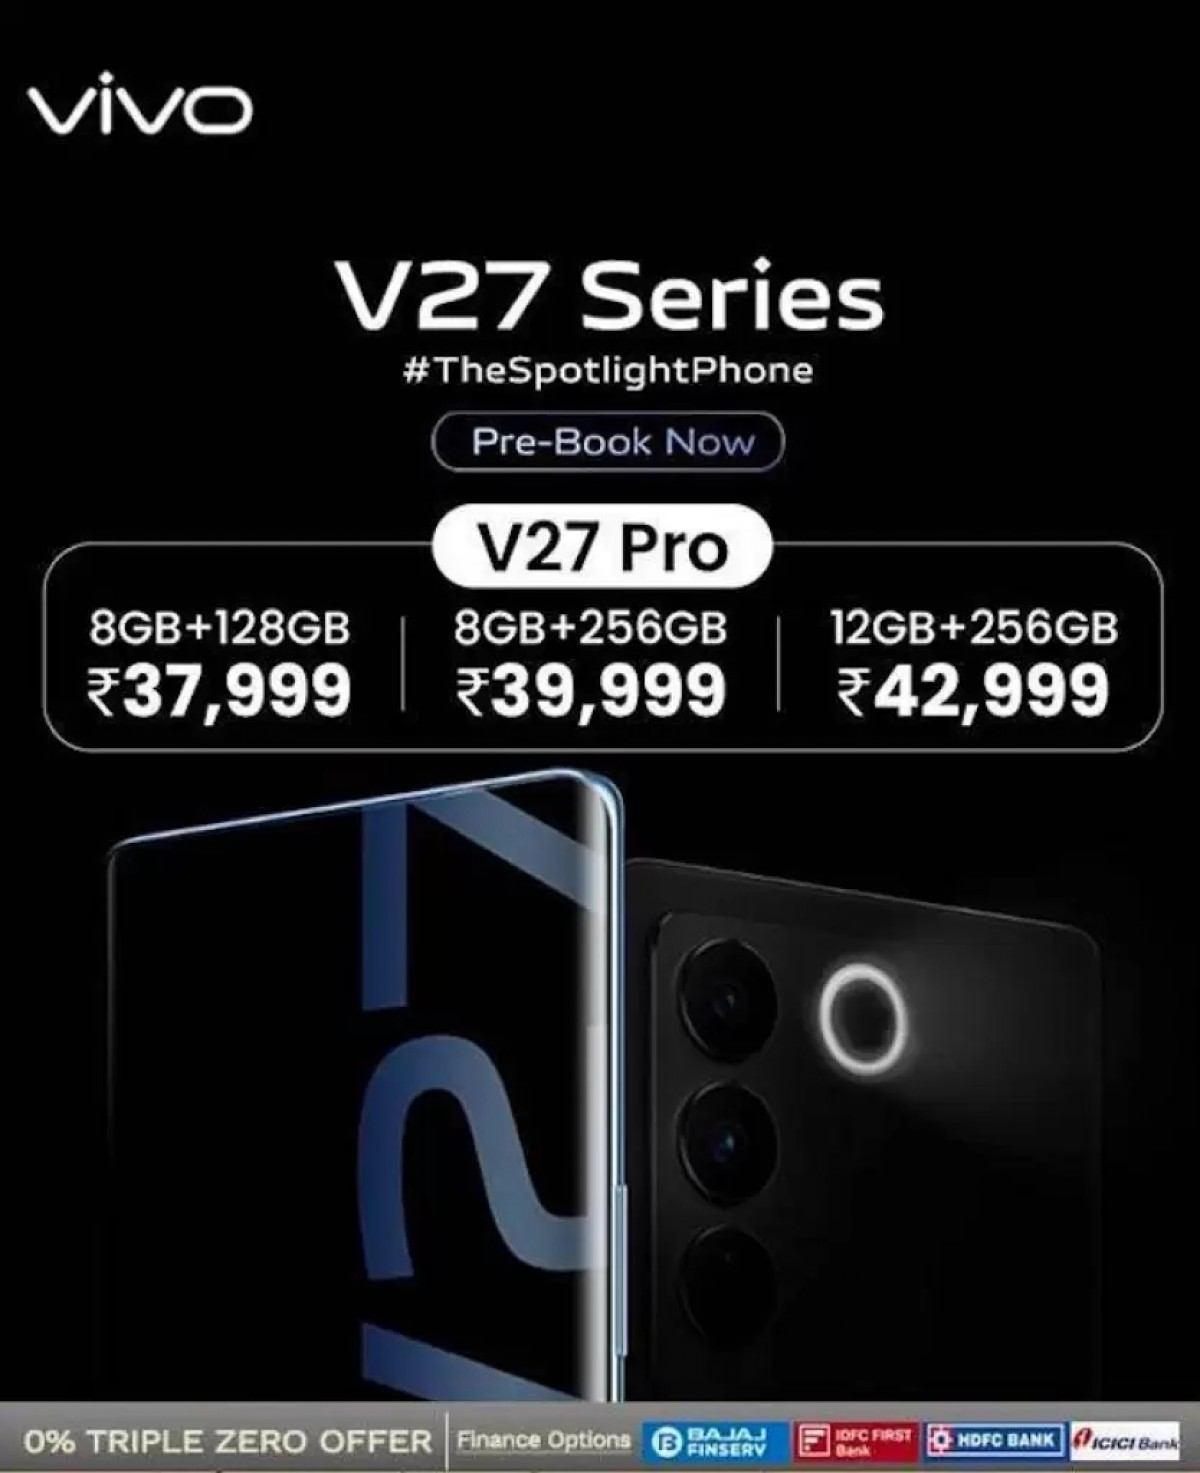 vivo V27 Pro prices and specs leak ahead of launch